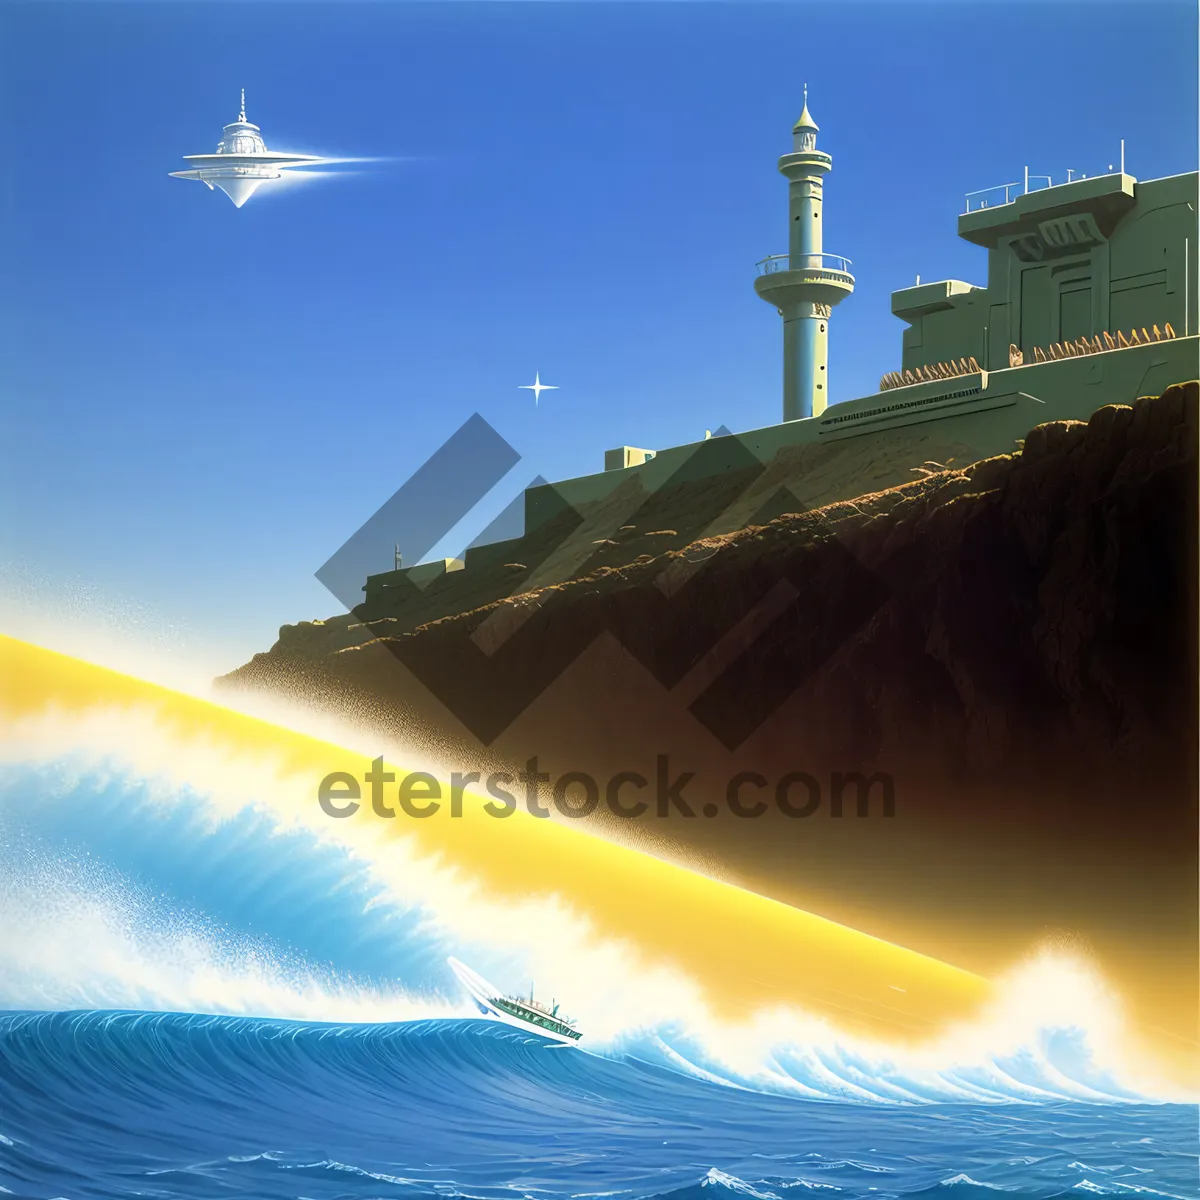 Picture of Coastal City Lighthouse with Ocean View